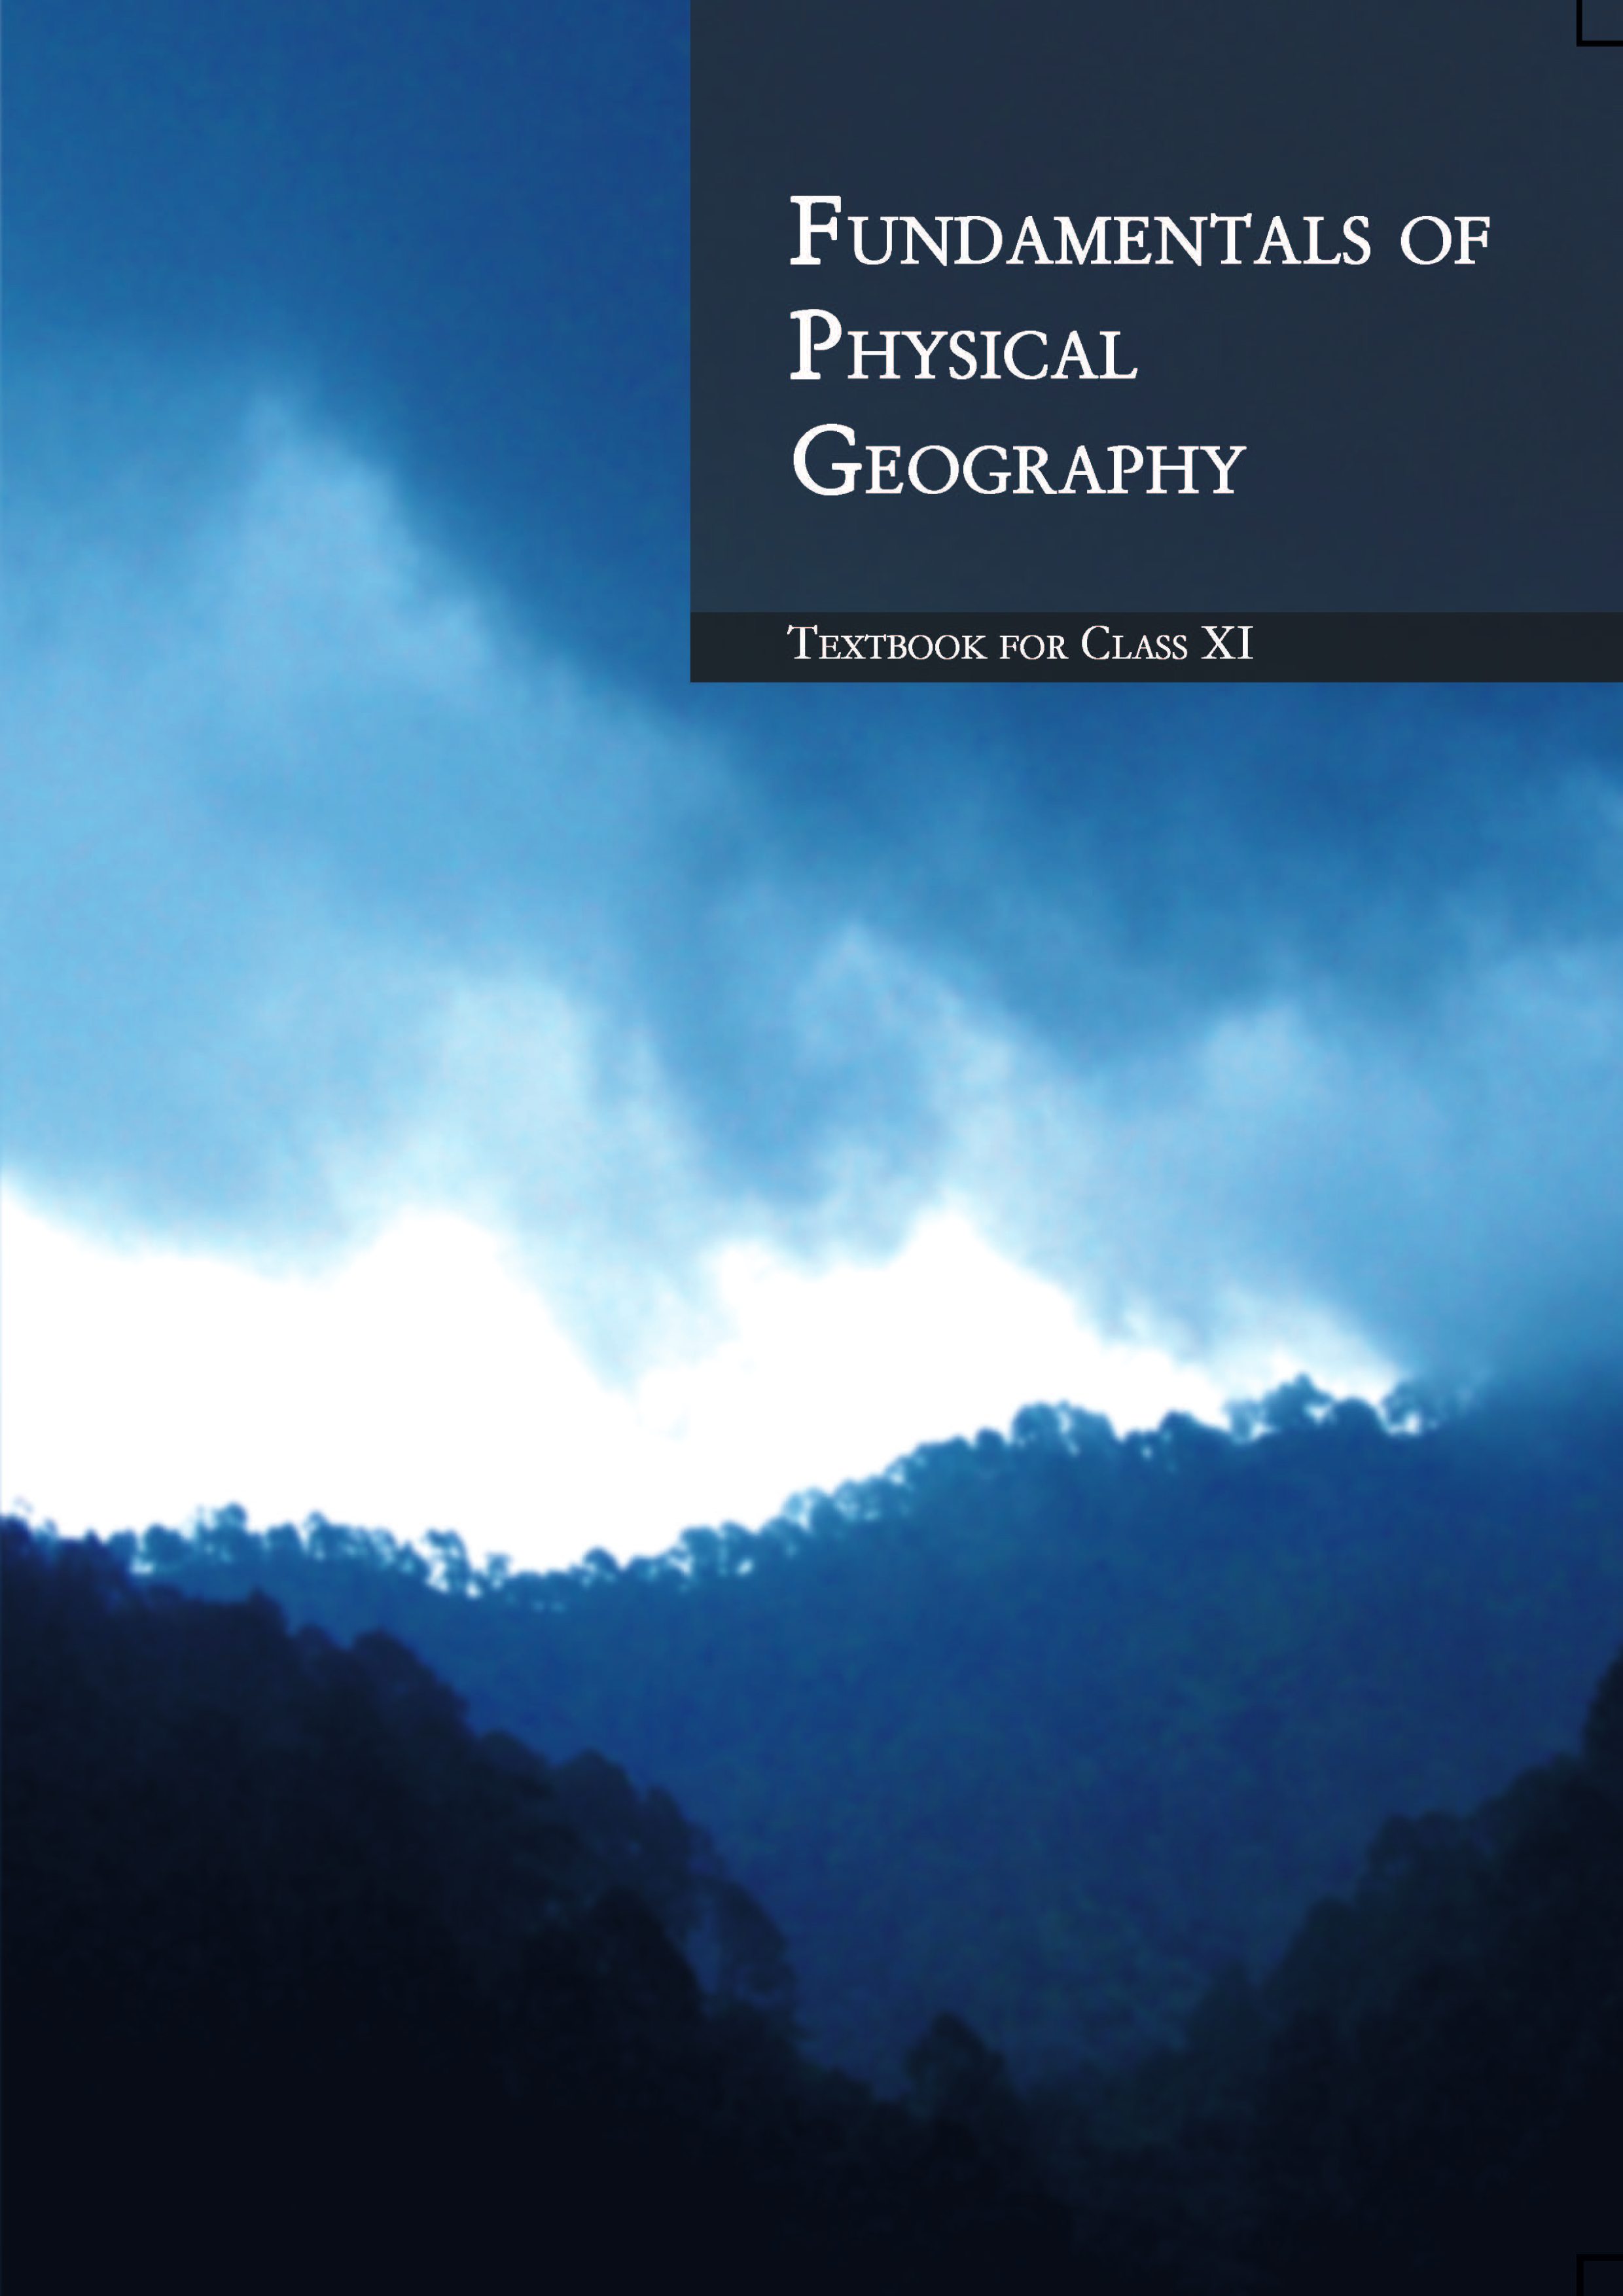 NCERT Class XI – Fundamentals of Physical Geography